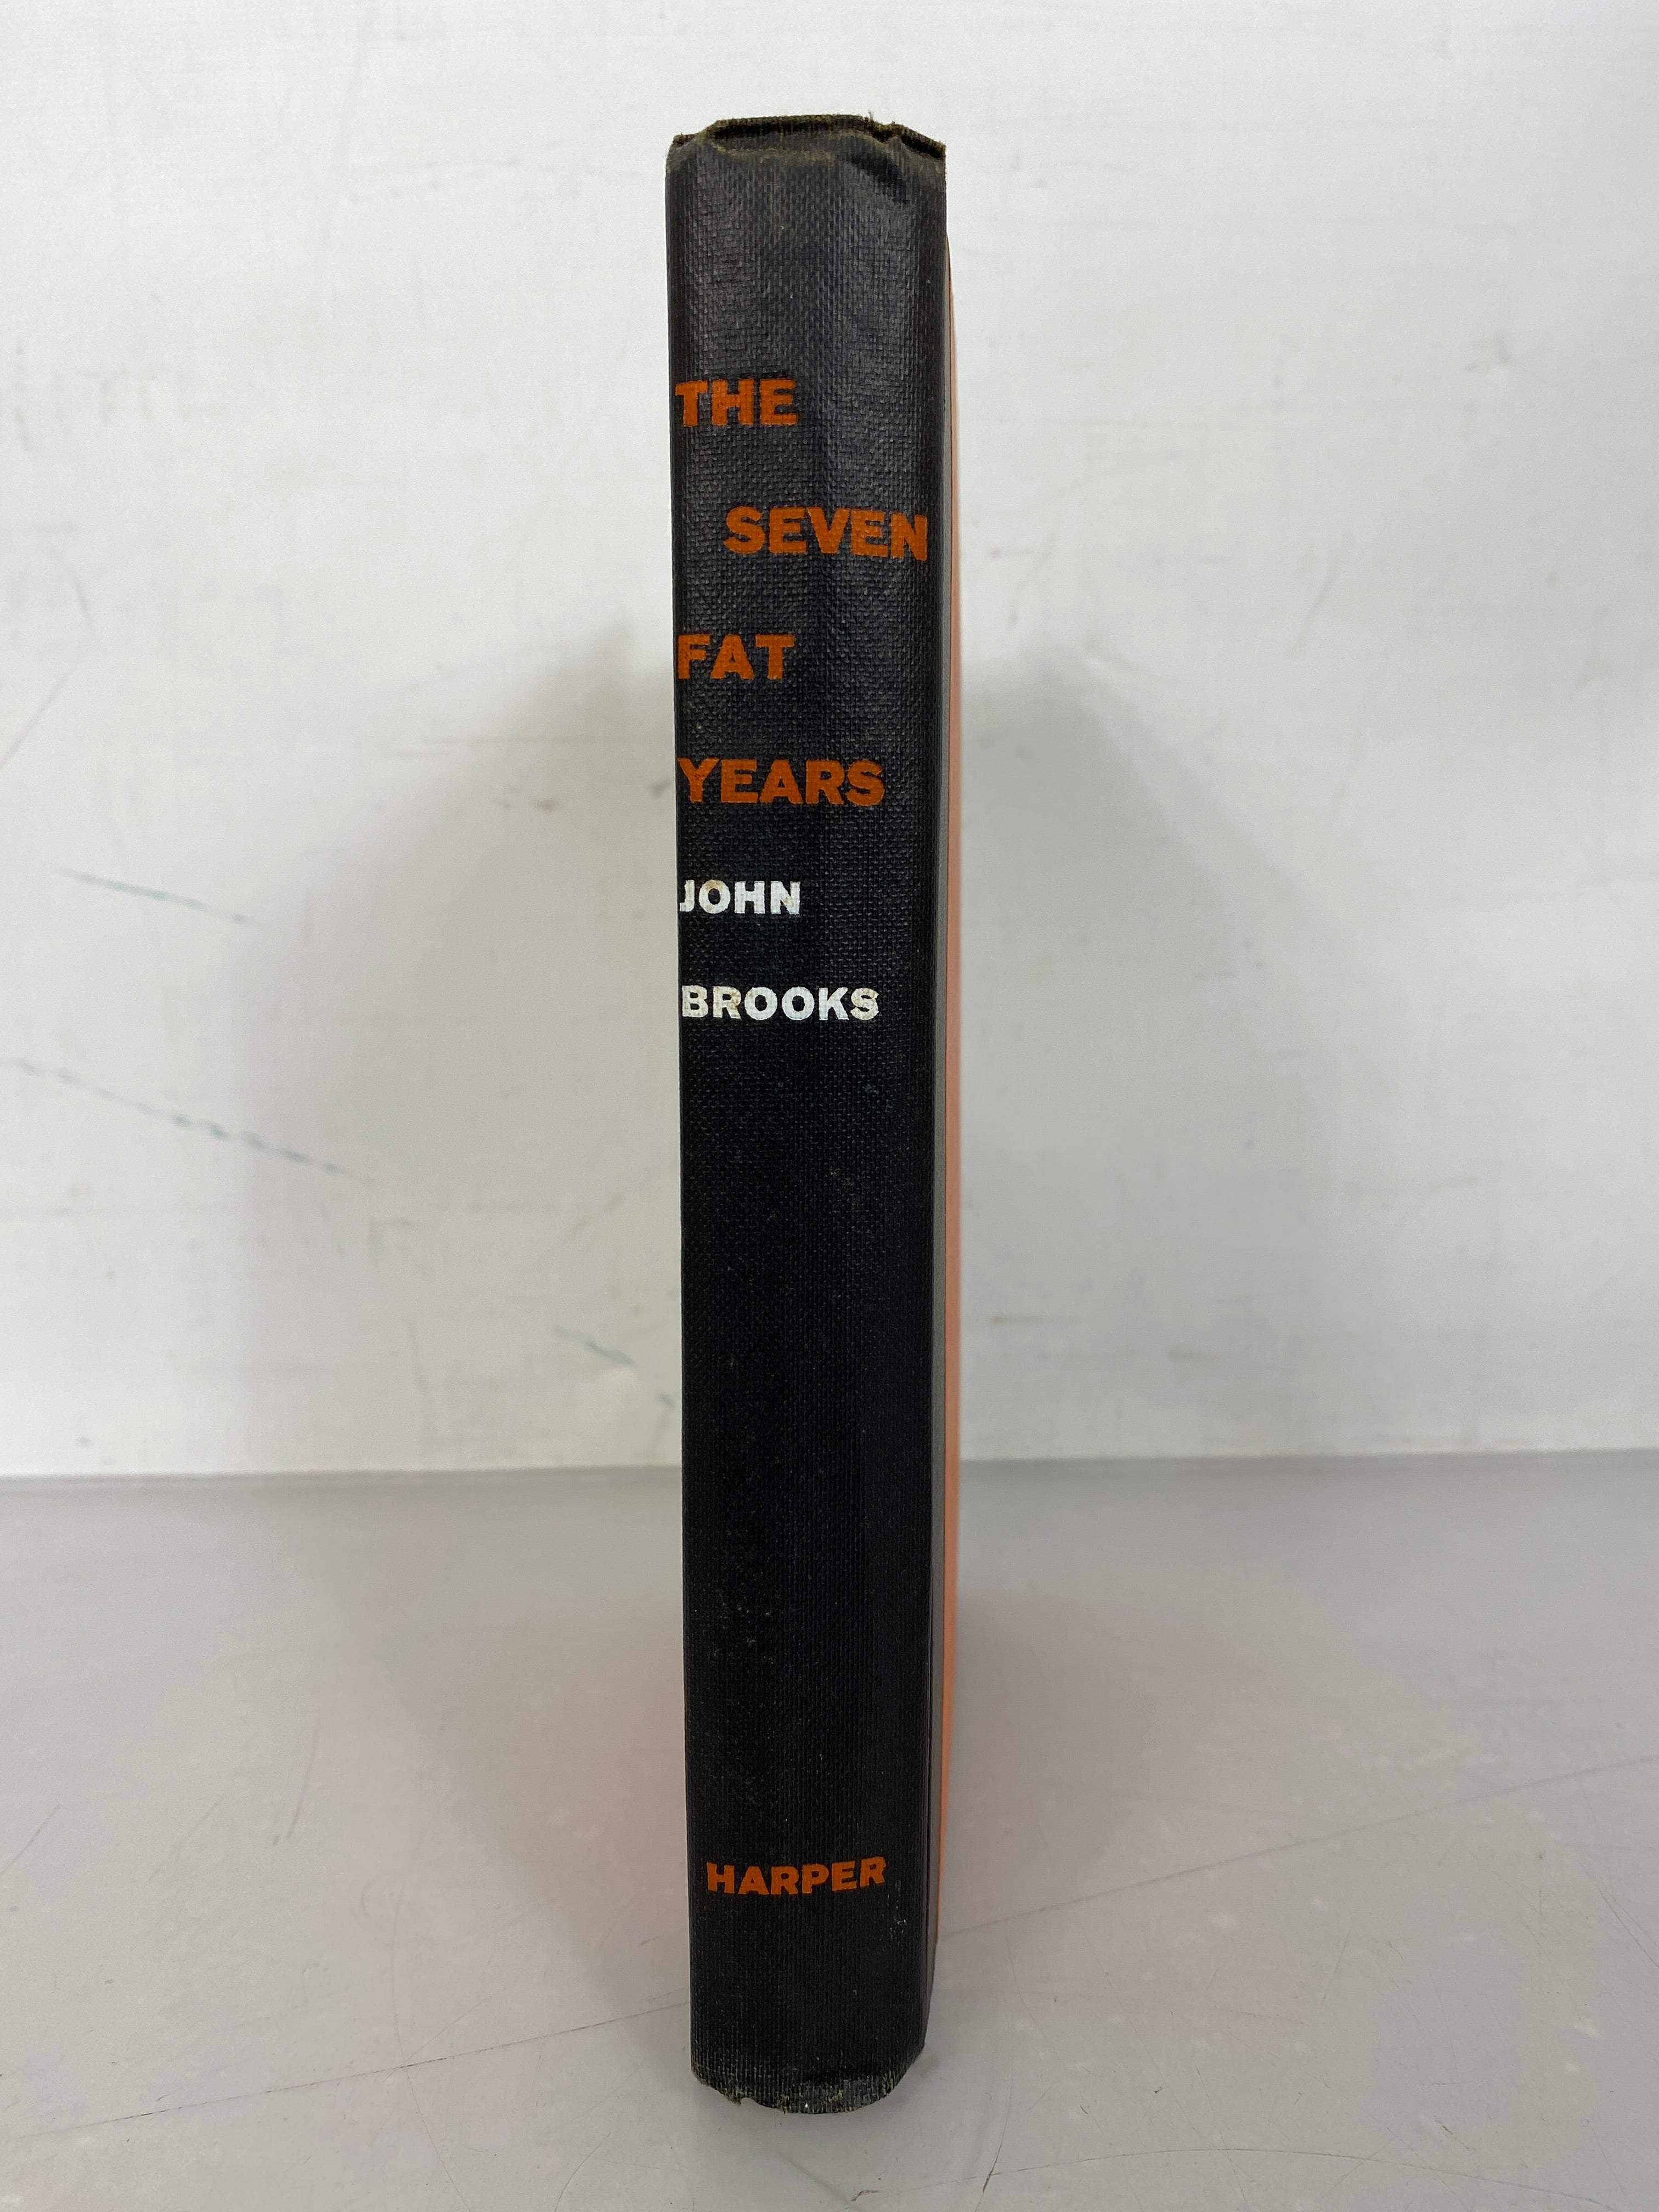 First Edition The 7 Fat Years by Books Chronicles of Wall Street 1958 HC DJ